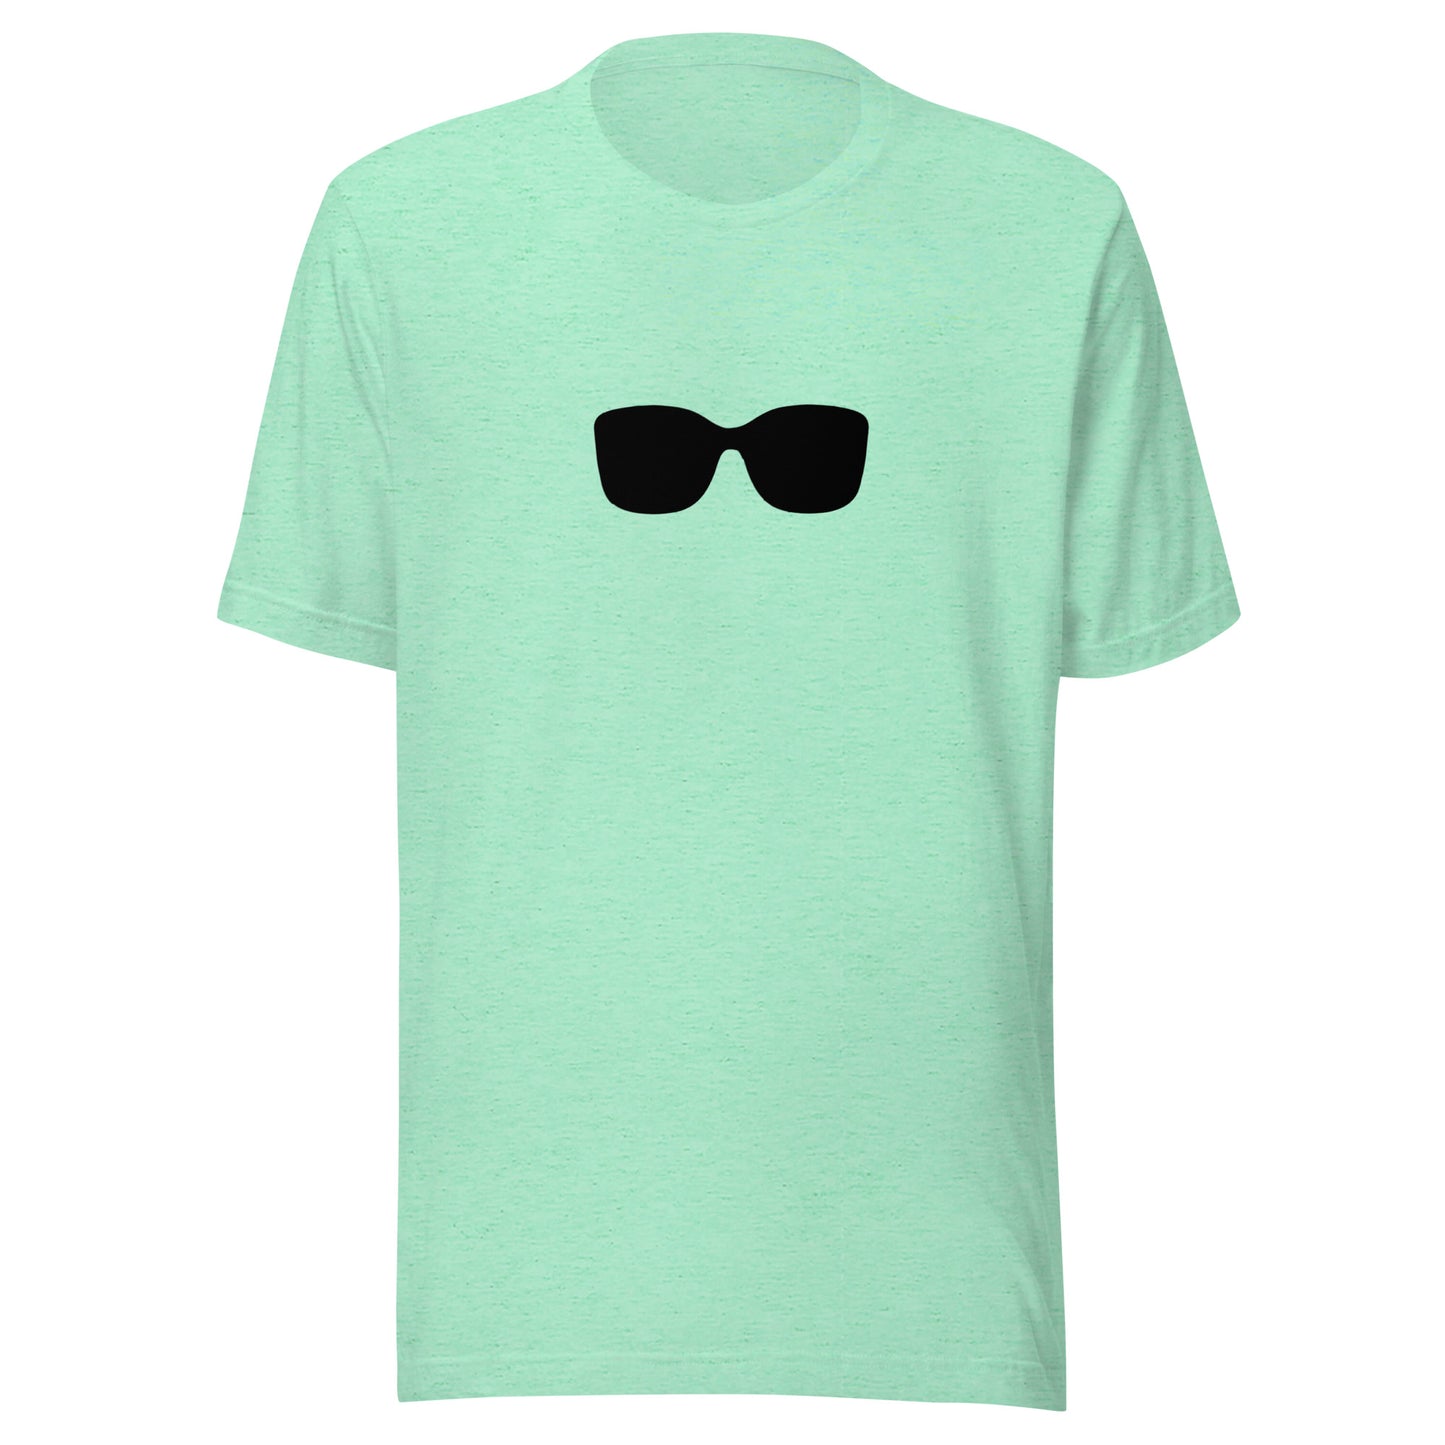 It's Giving Shades Tee